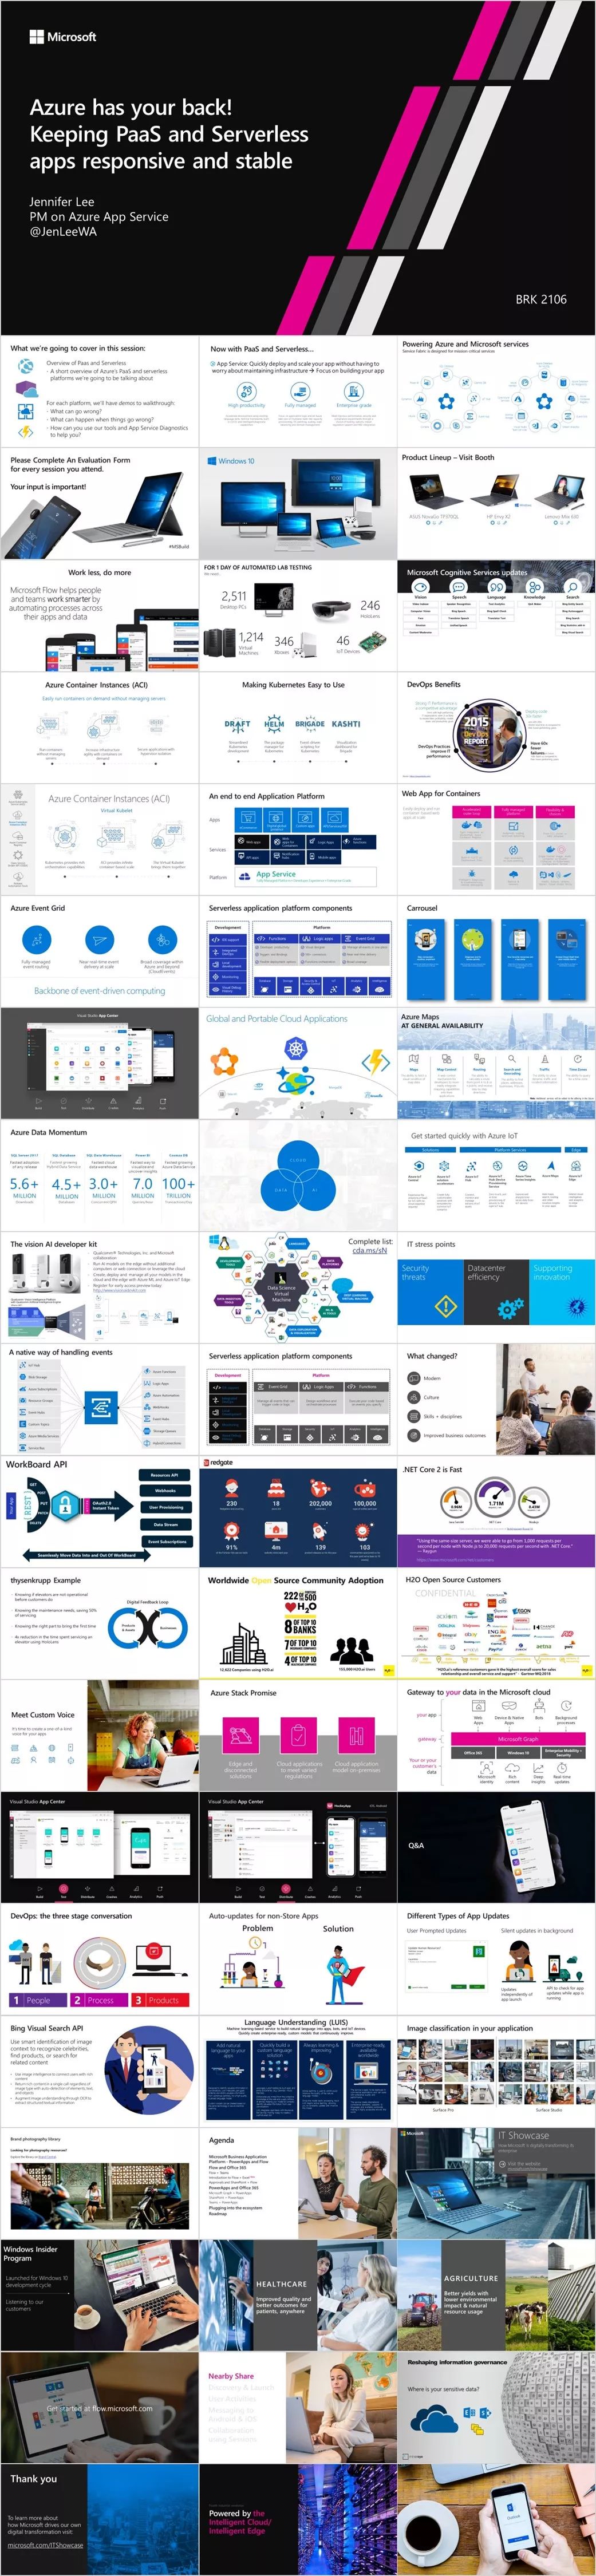 More than 400 pages of Microsoft PPT templates and chart materials, free to receive